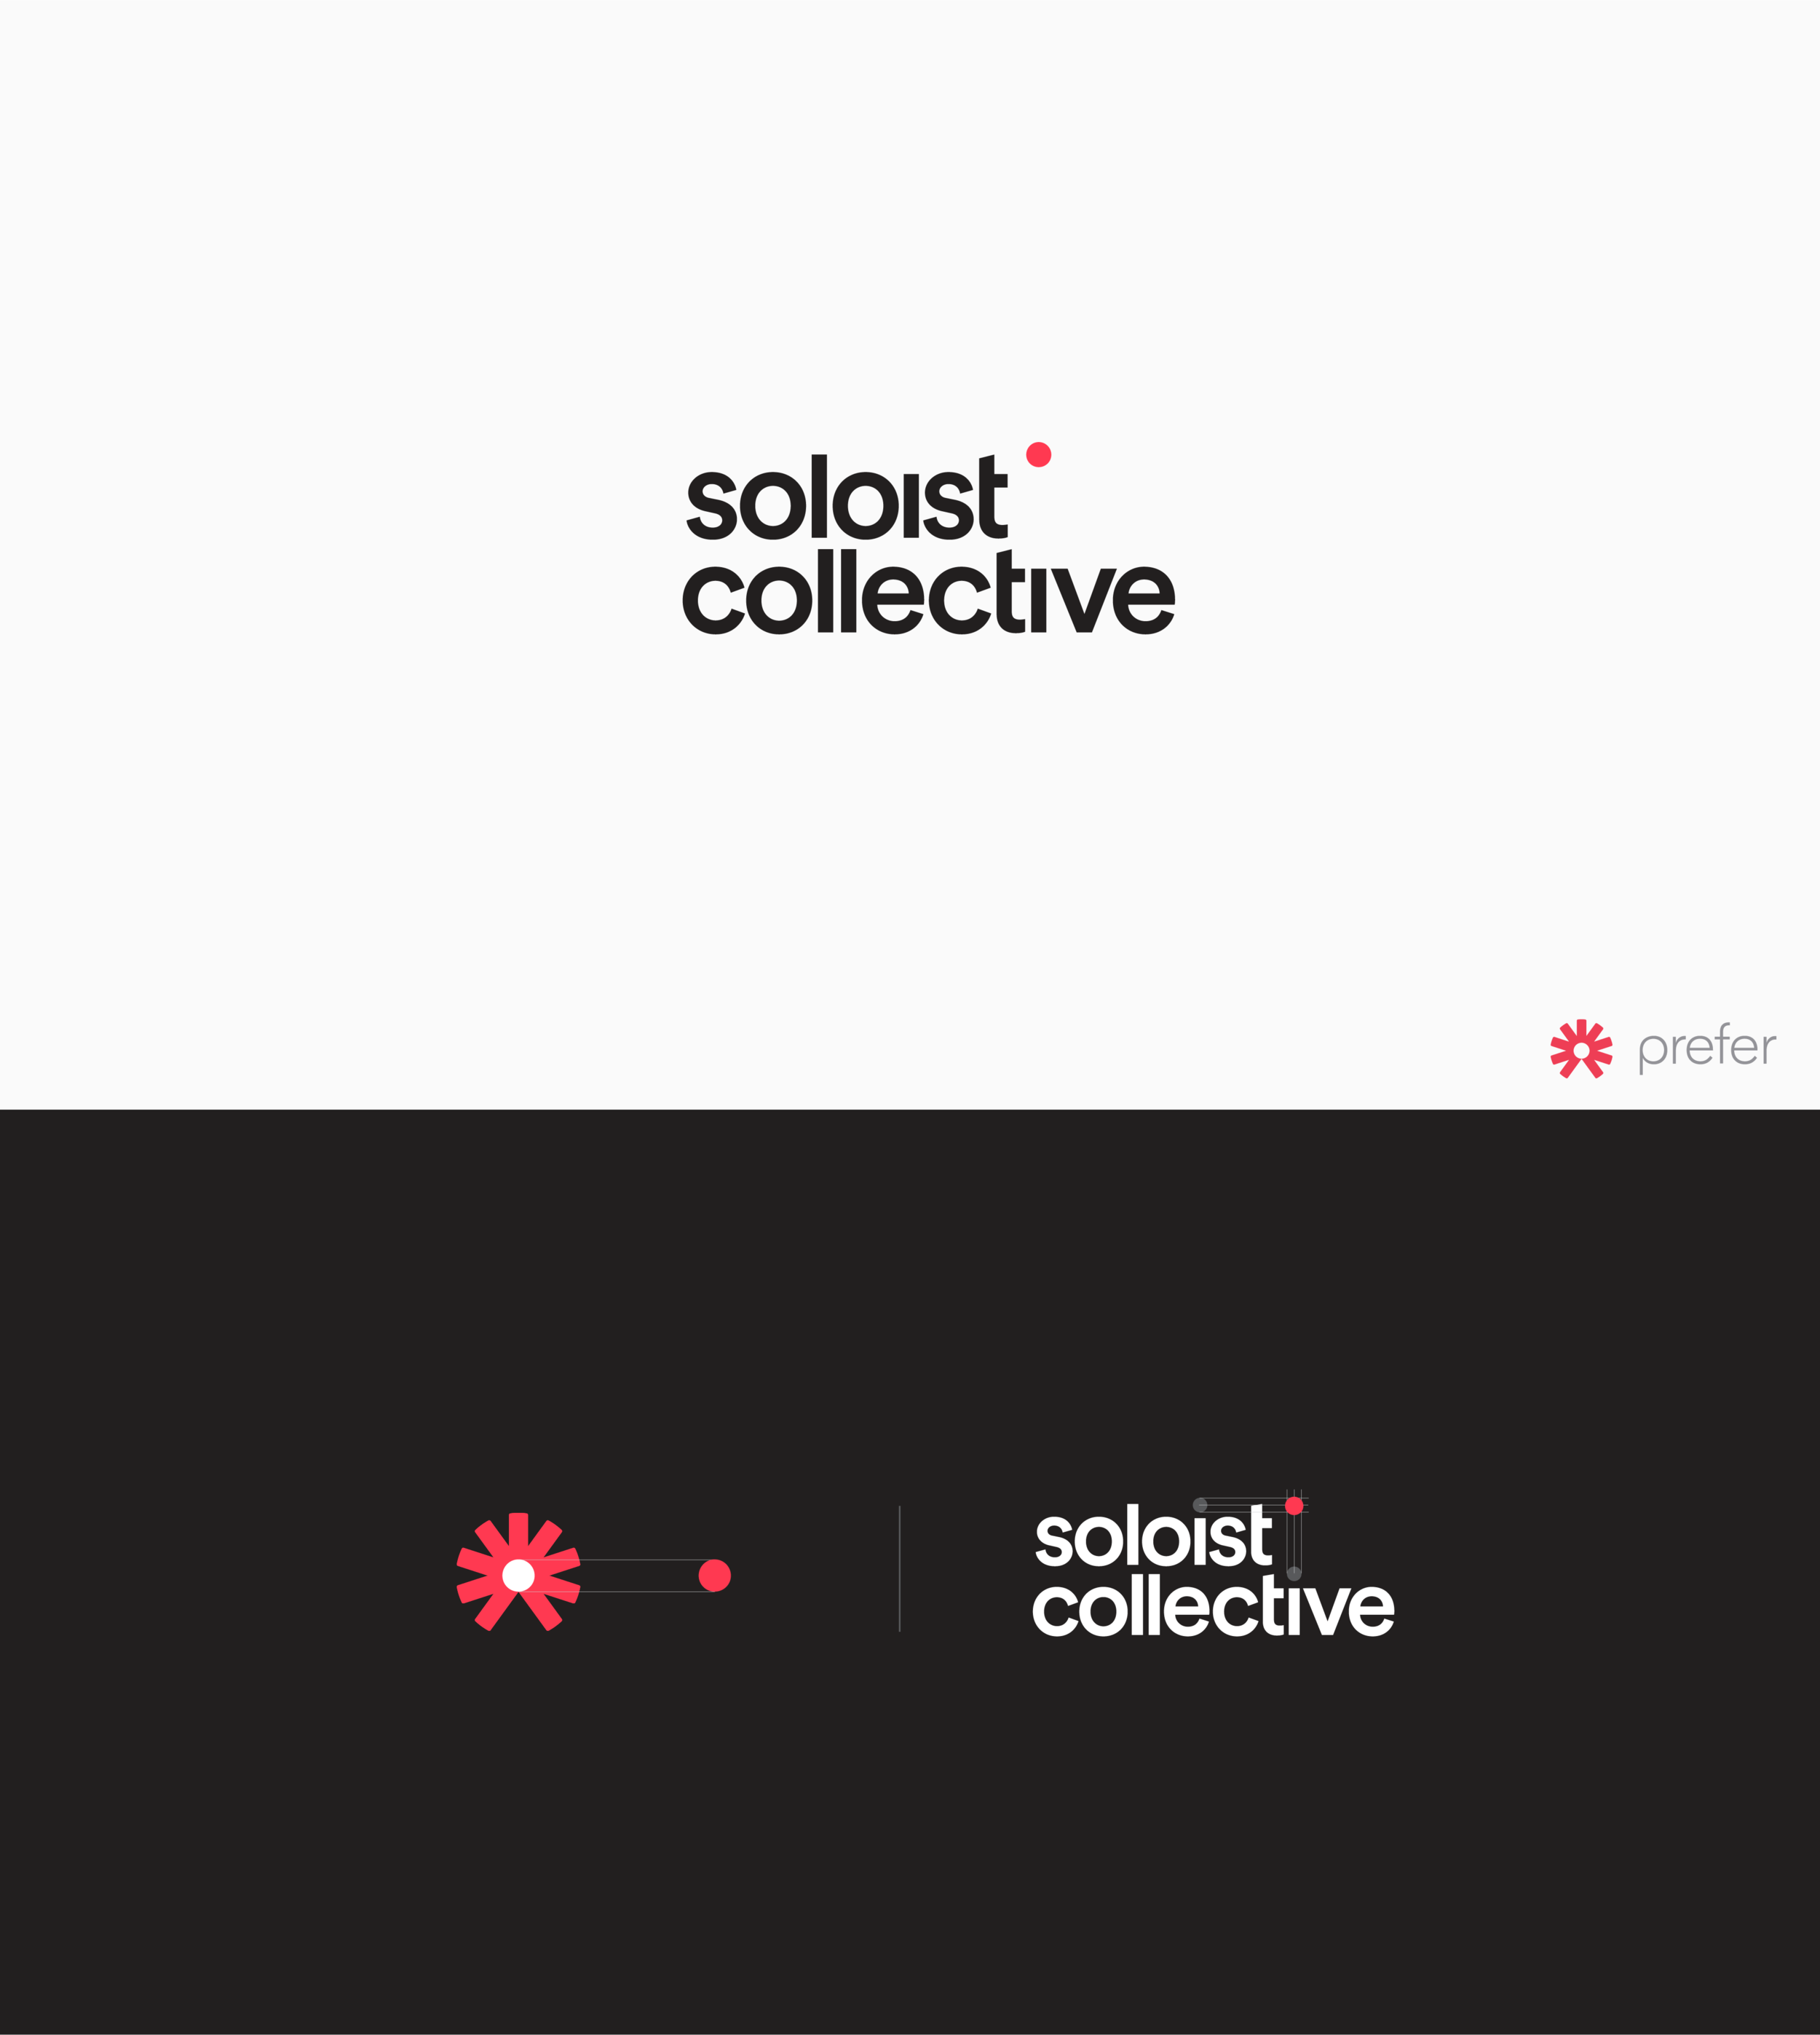 soloist collective design 1@2x.png